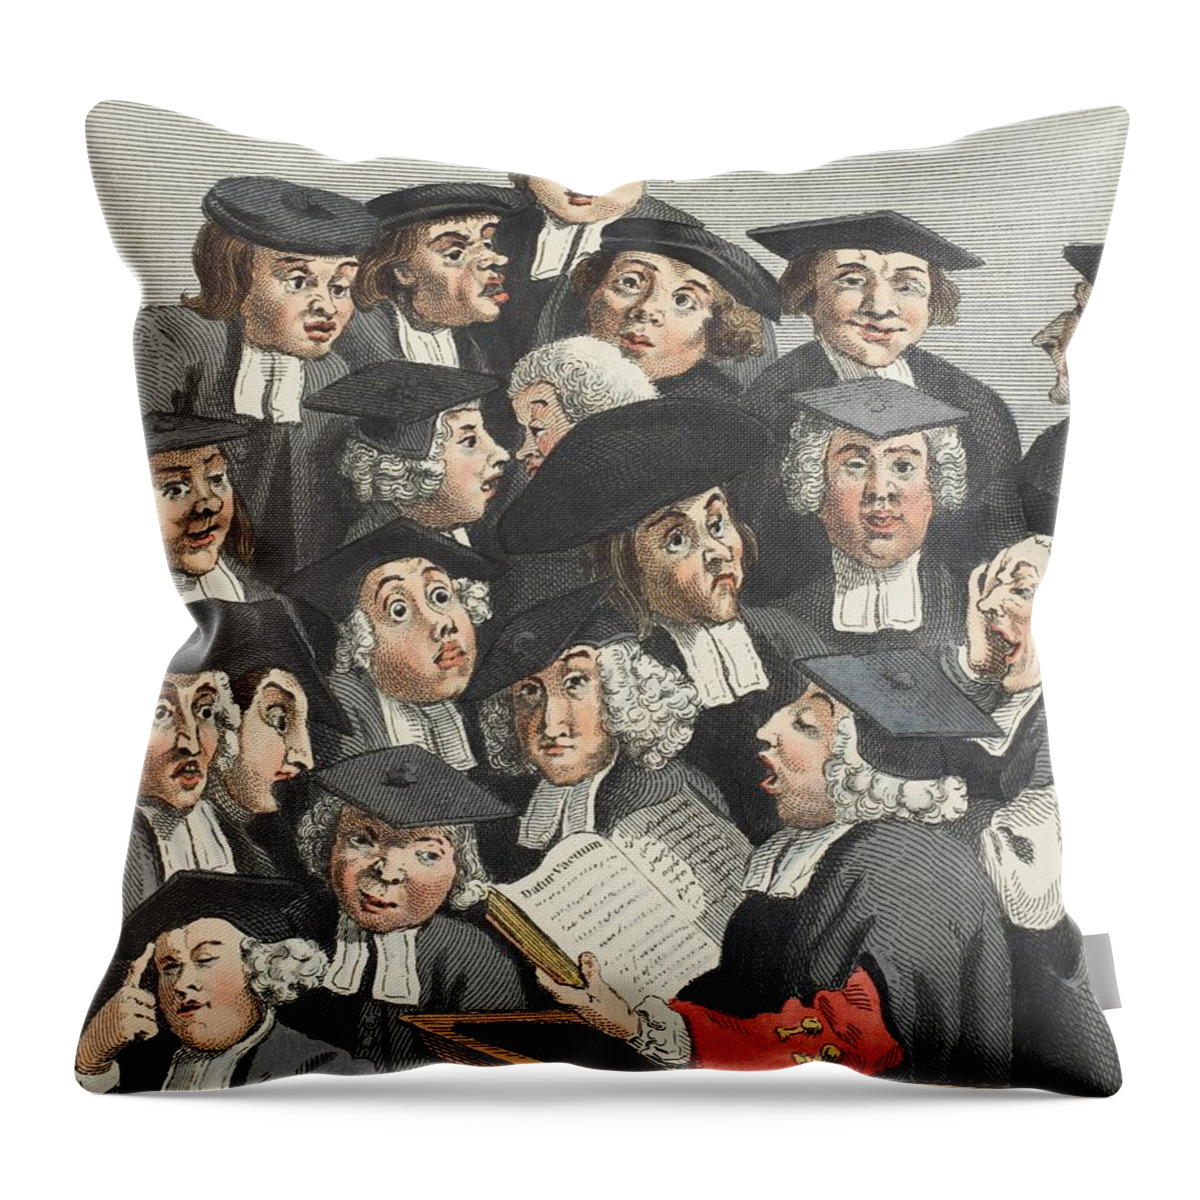 Caricature Throw Pillow featuring the drawing The Lecture, Illustration From Hogarth by William Hogarth